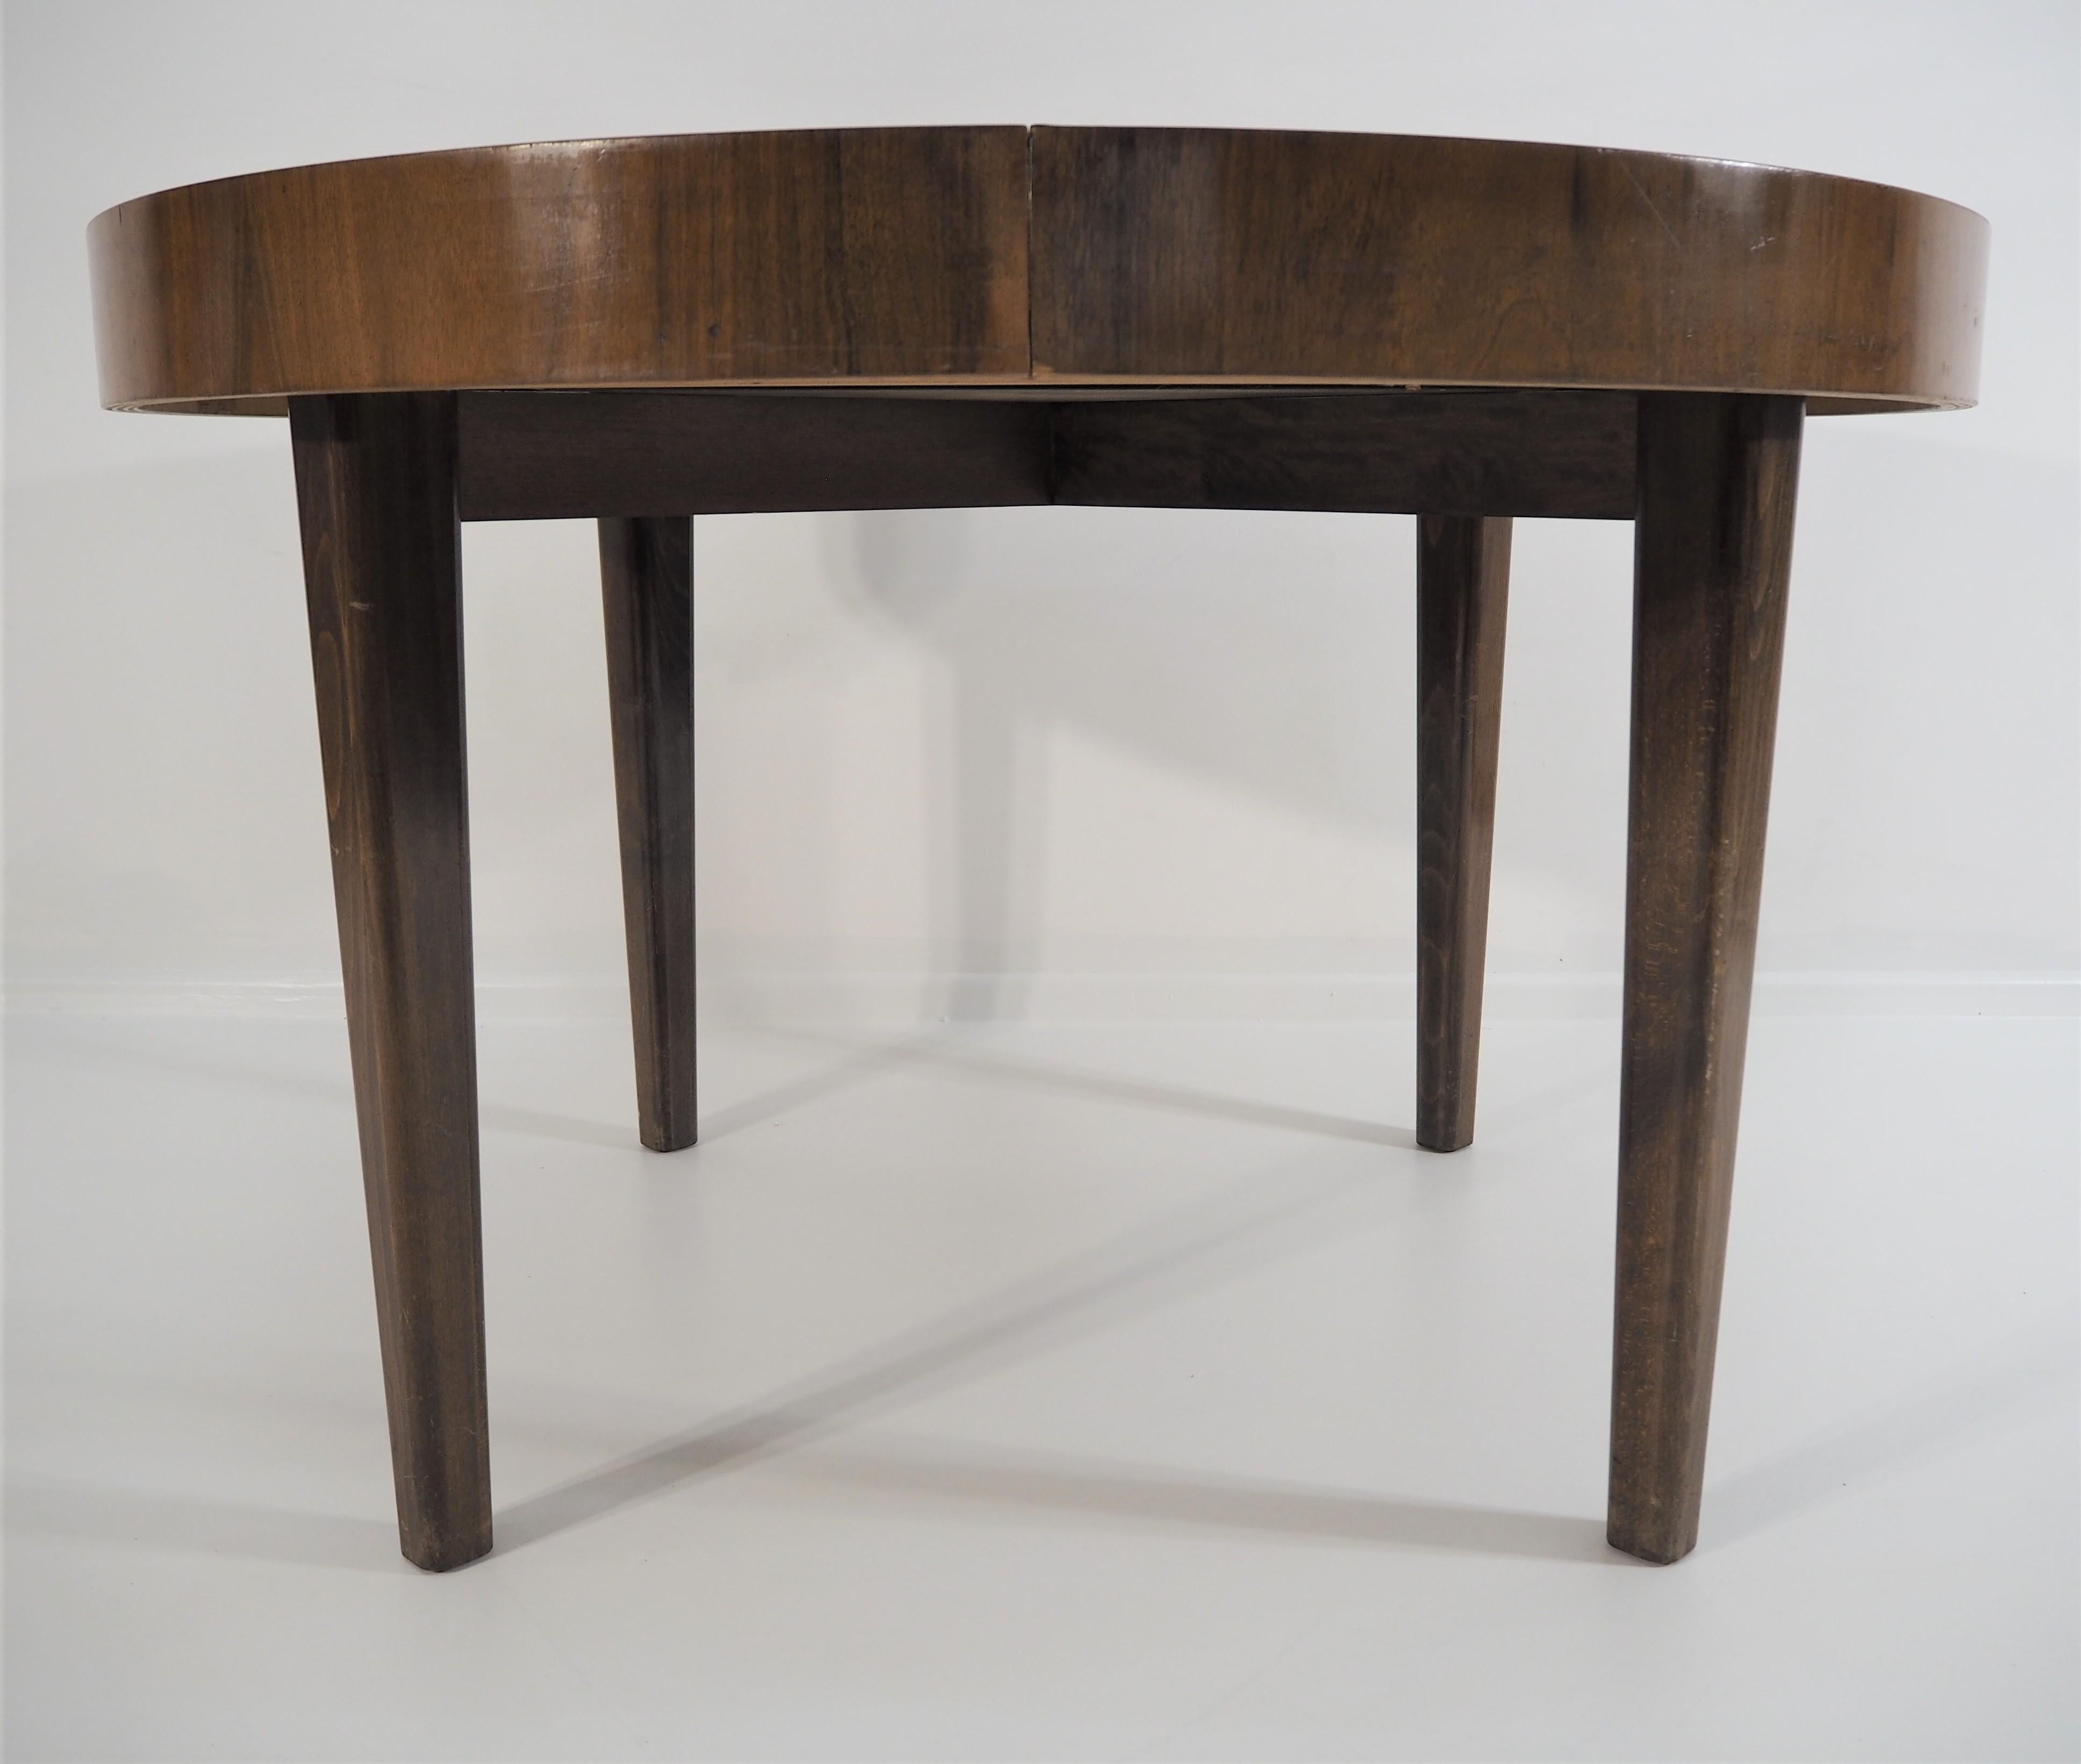 Art Deco walnut extendable dining table. This adjustable dining table was designed and made in 1950s in the former Czechoslovakia. It was designed by Jindrich Halabala. The material is a combination of solid wood and walnut veneer. Dimensions: 77cm